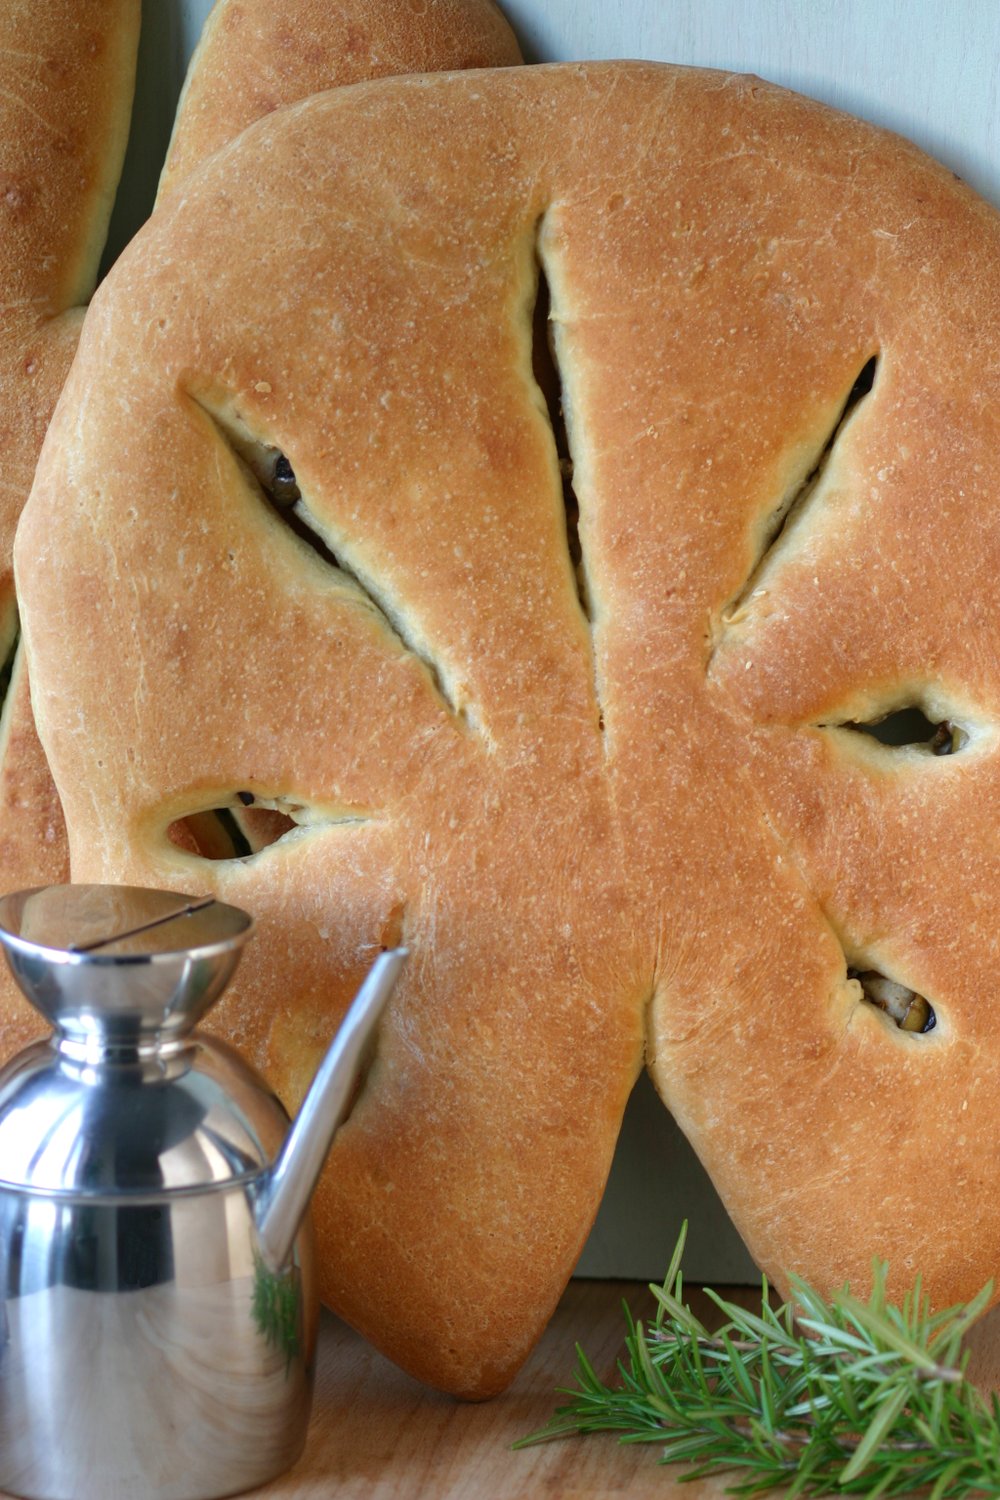 This recipe for Fougasse, a traditional Provençal bread, is crispy, crusty, and stuffed with olives and herbs.